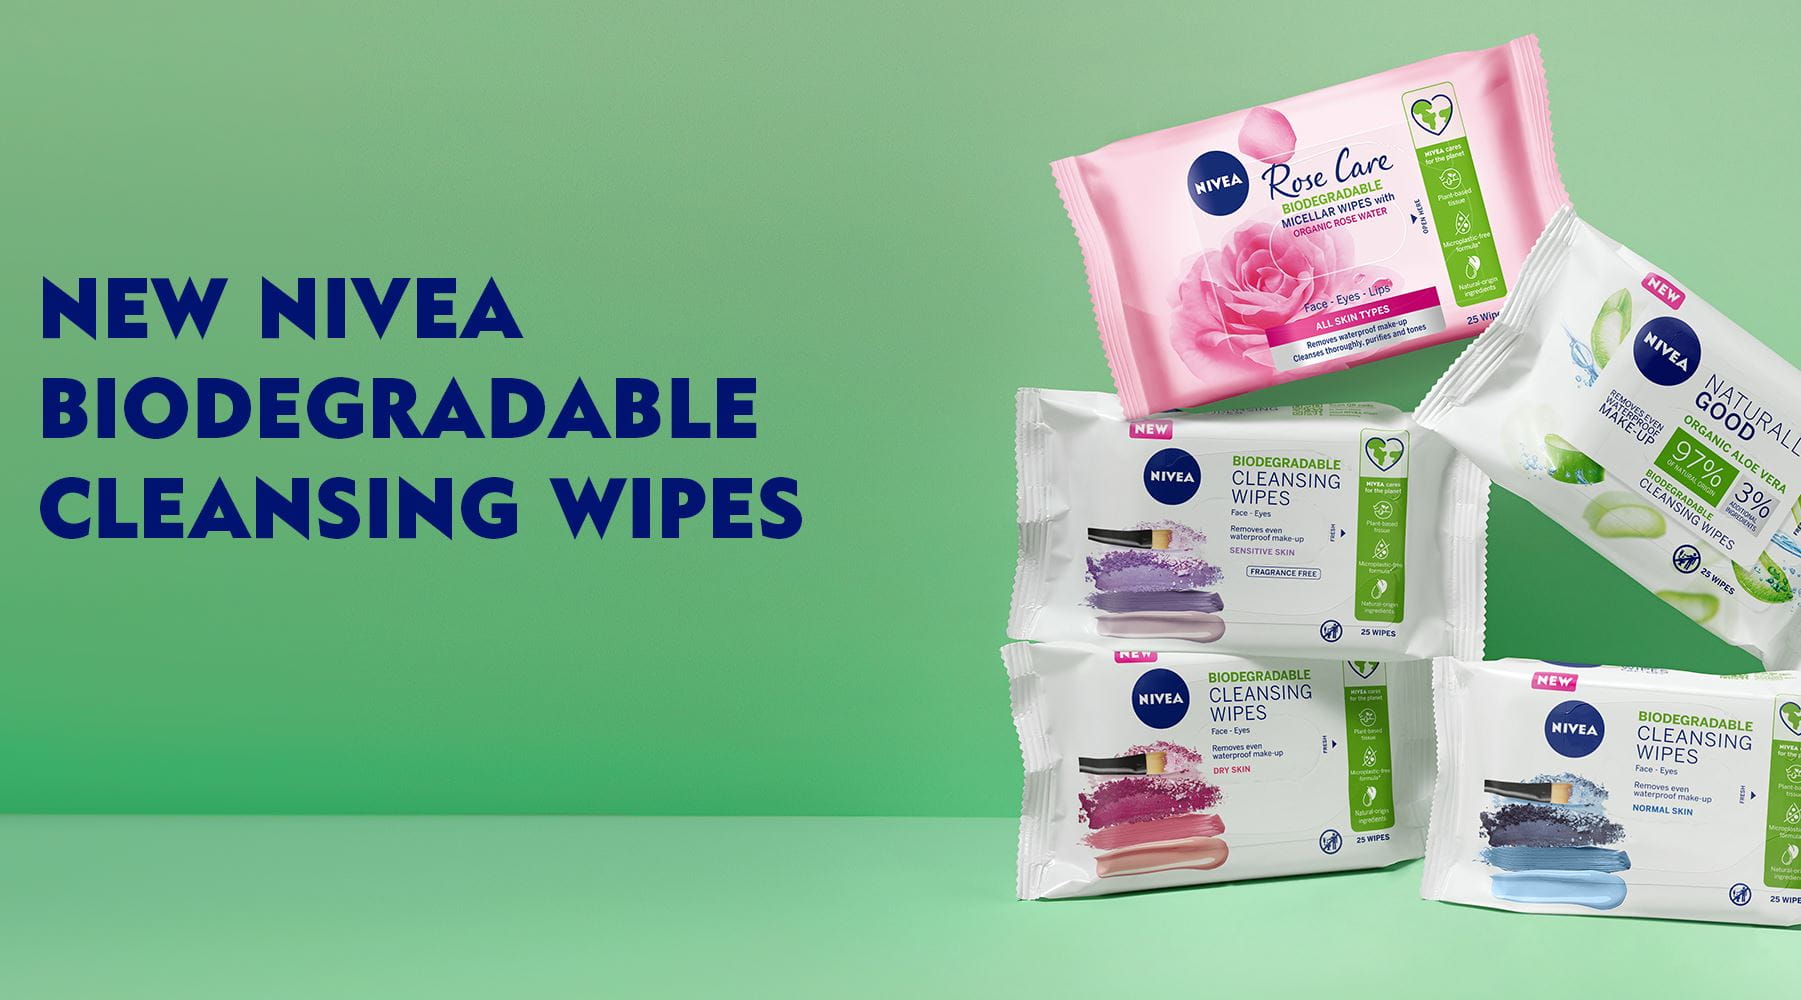 Biodegradable wipes